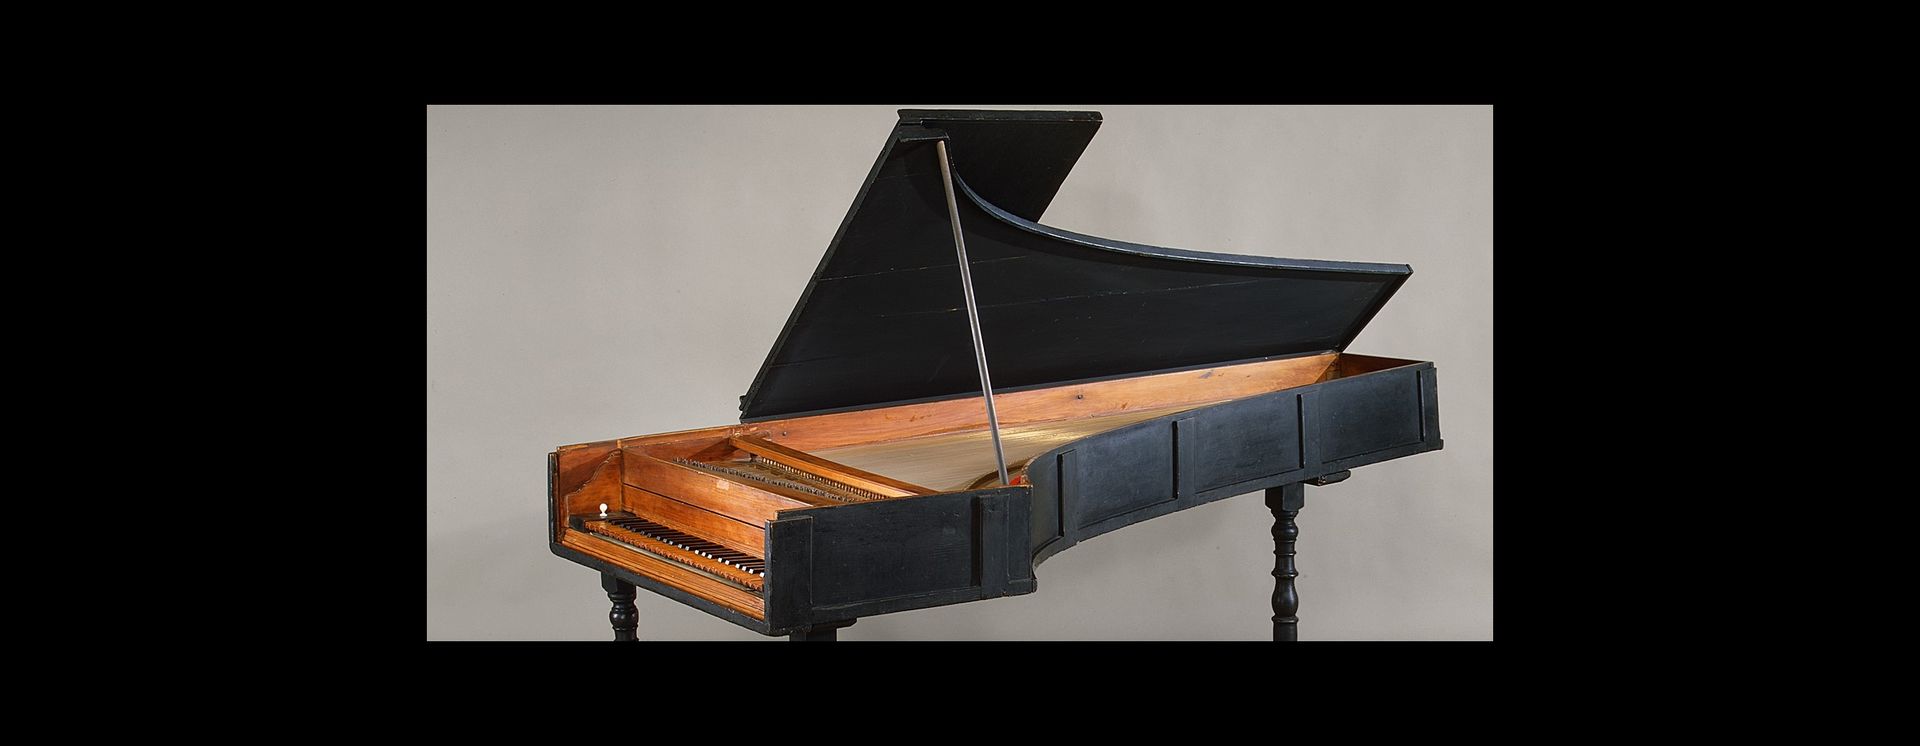 A seventeenth-century grand piano, made of cypress and boxwood, in front of a gray background